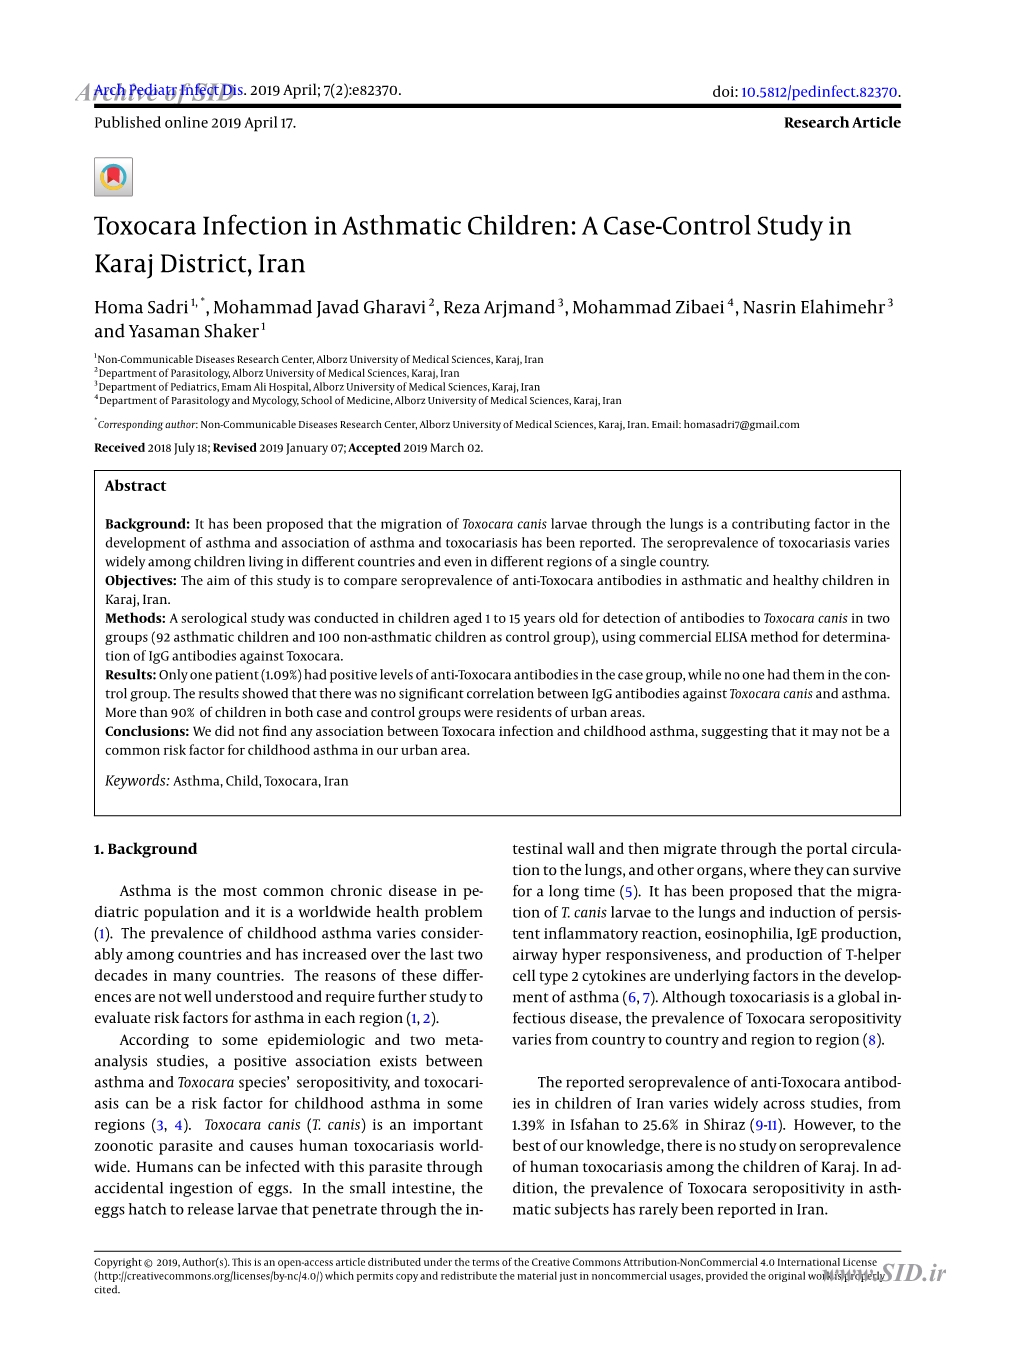 Toxocara Infection in Asthmatic Children: a Case-Control Study in Karaj District, Iran